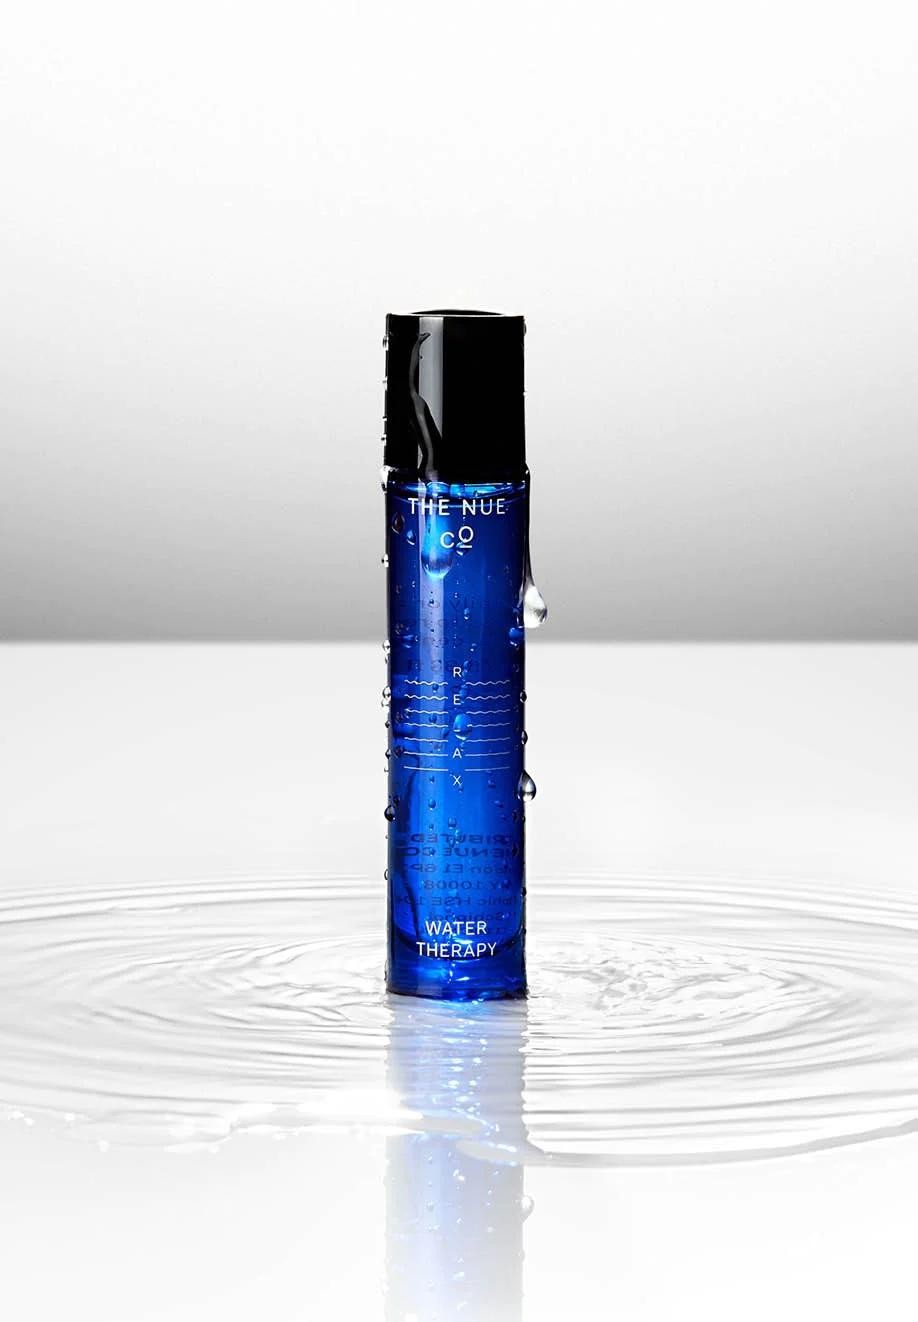 NUE Water Therapy fragrance